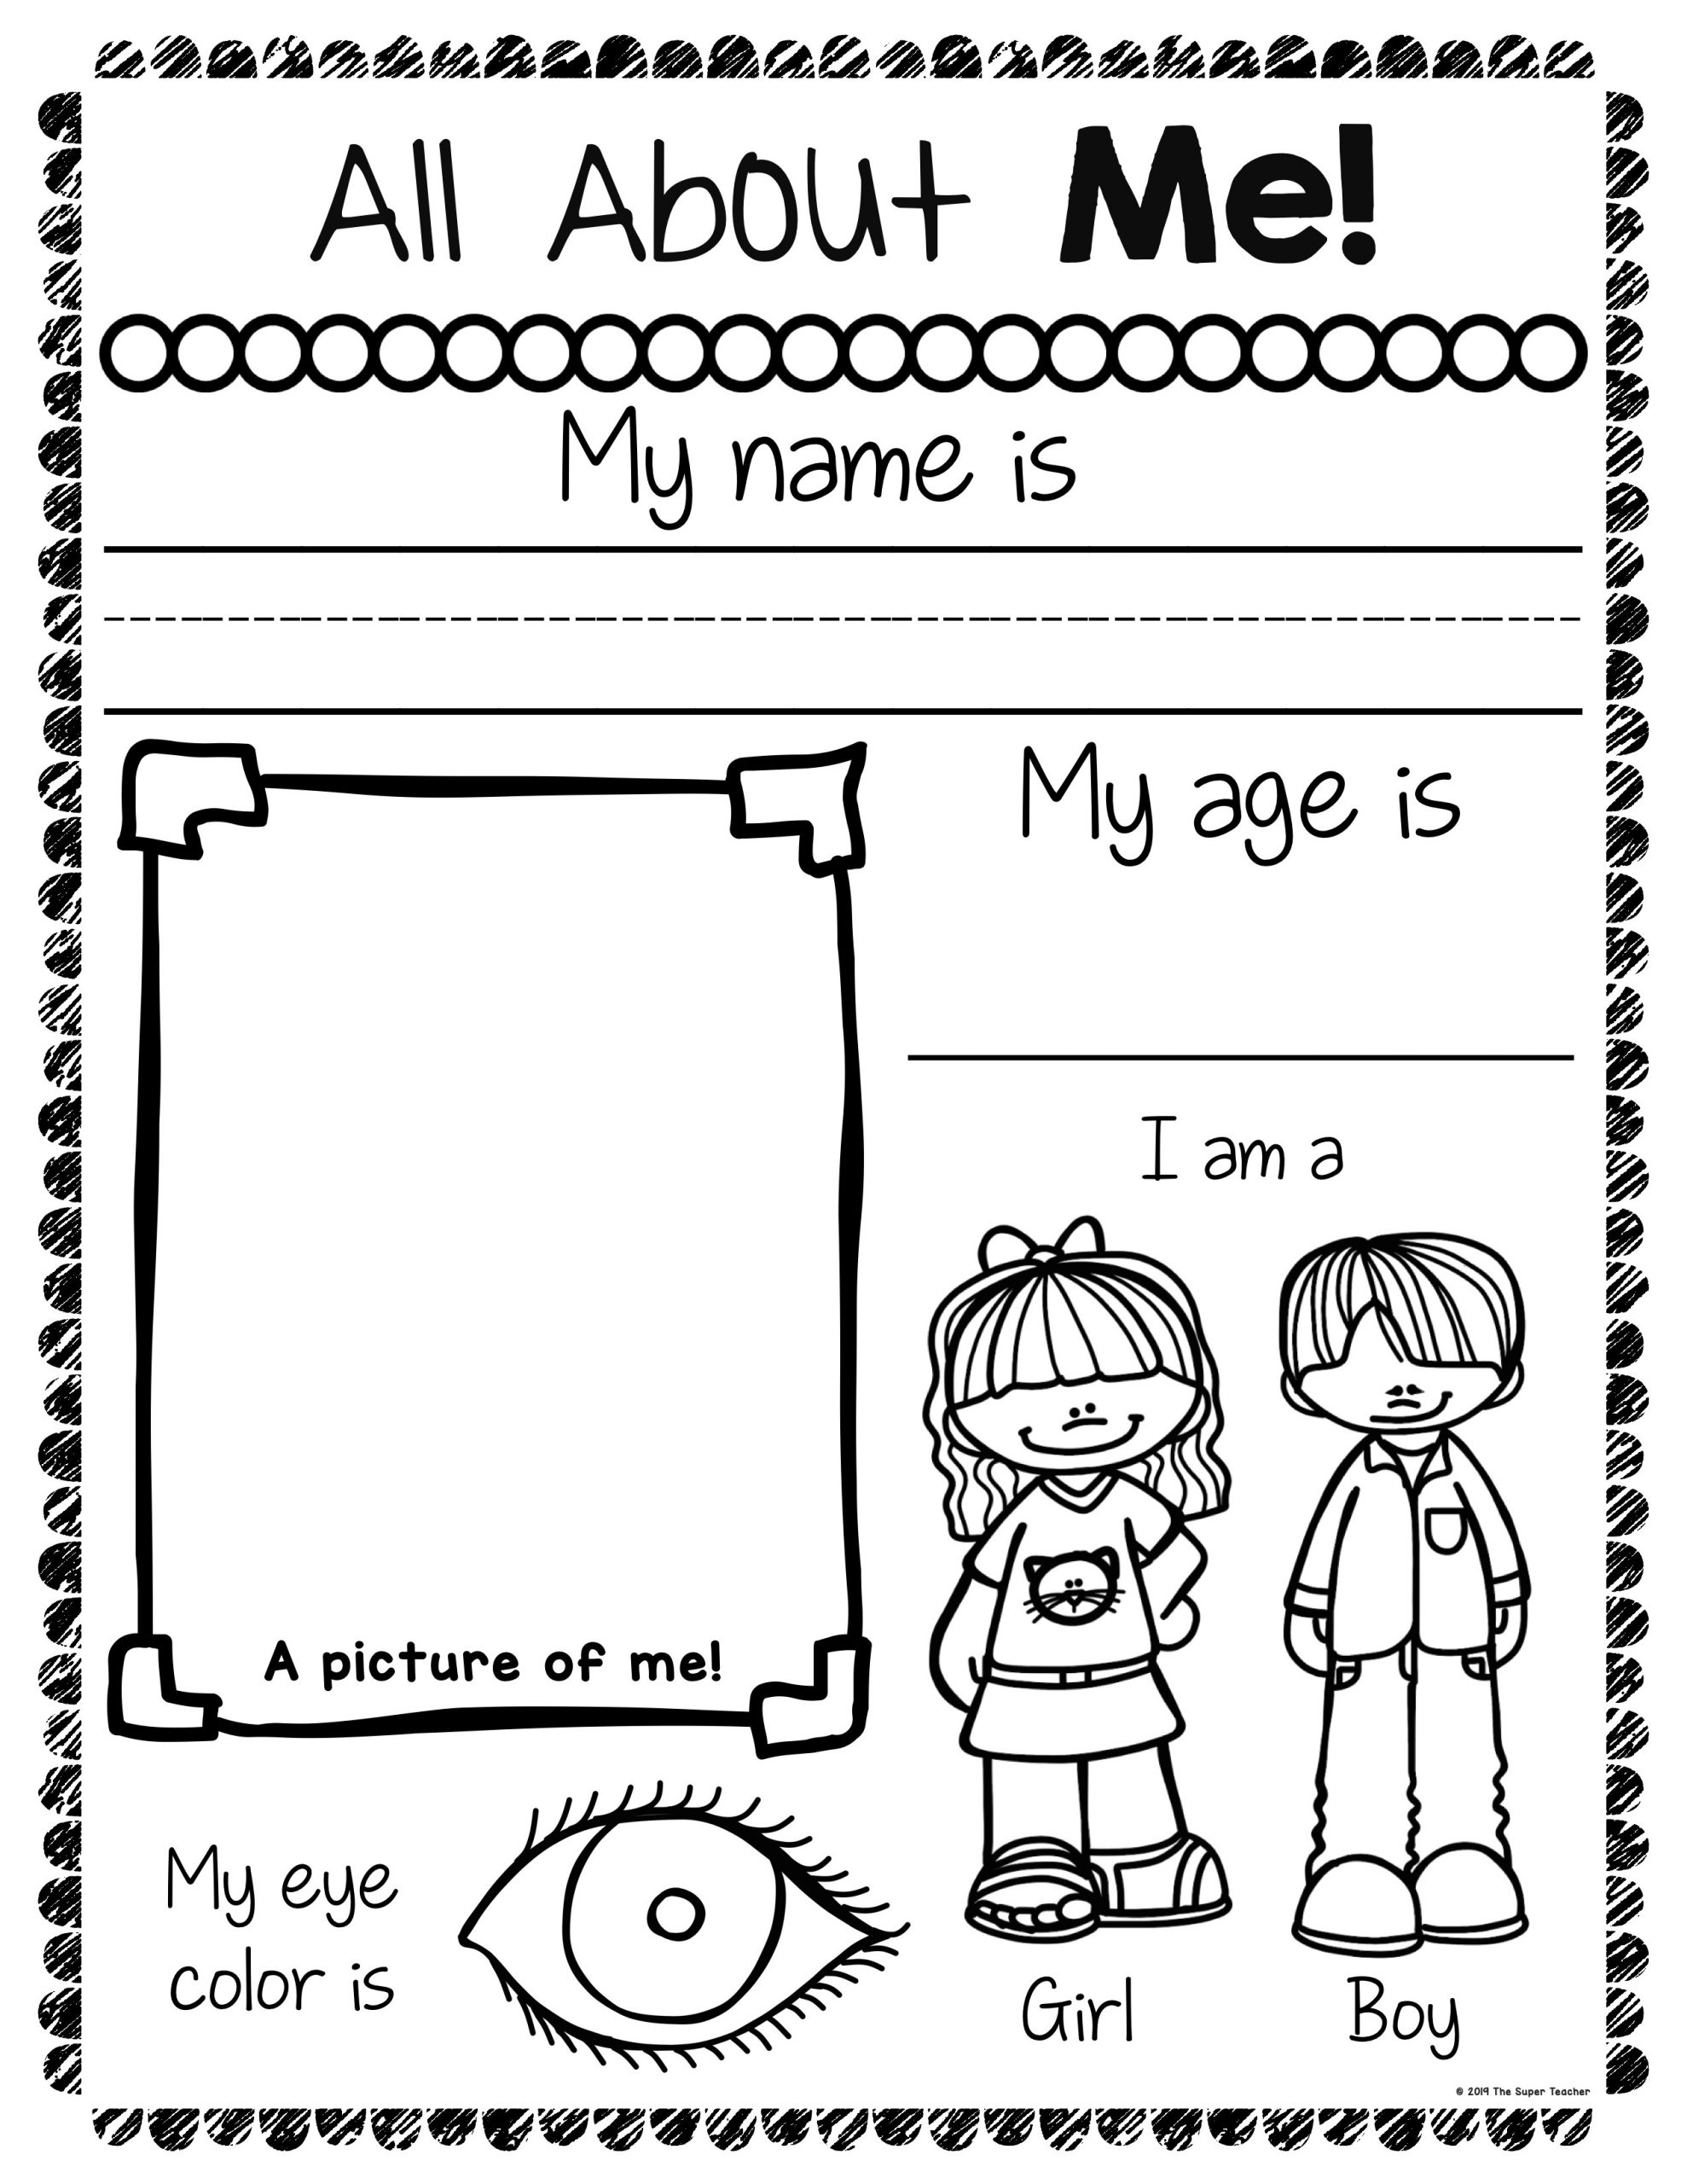 All About Me Printable Worksheet All About Me Worksheets